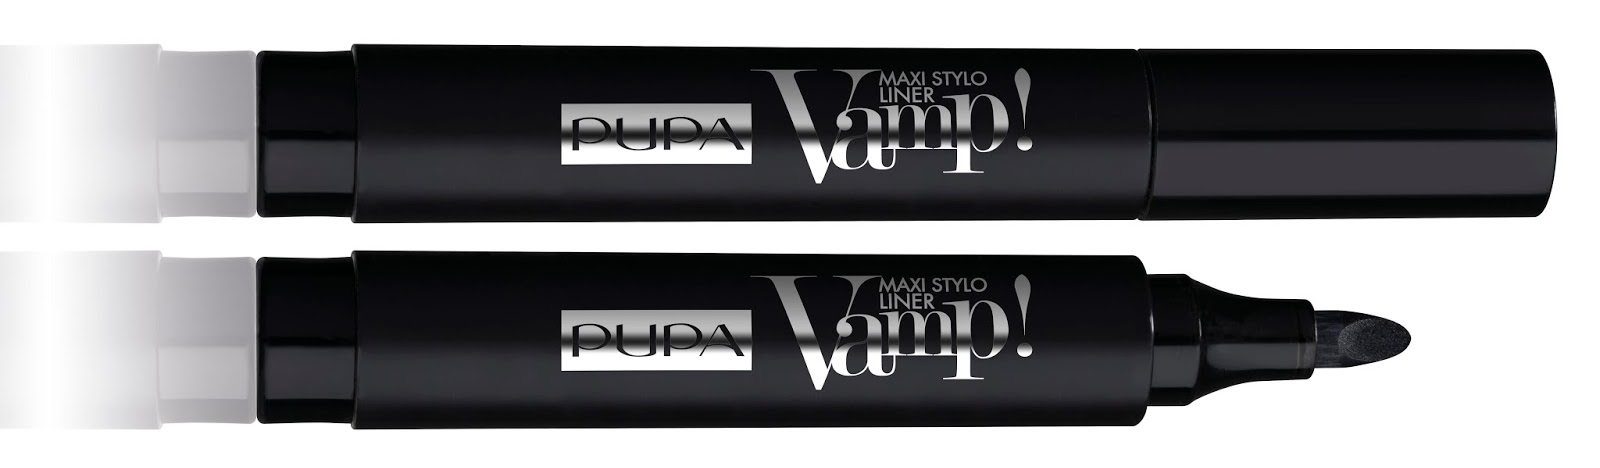 Sporty Chic Vamp! Maxi Stylo Liner